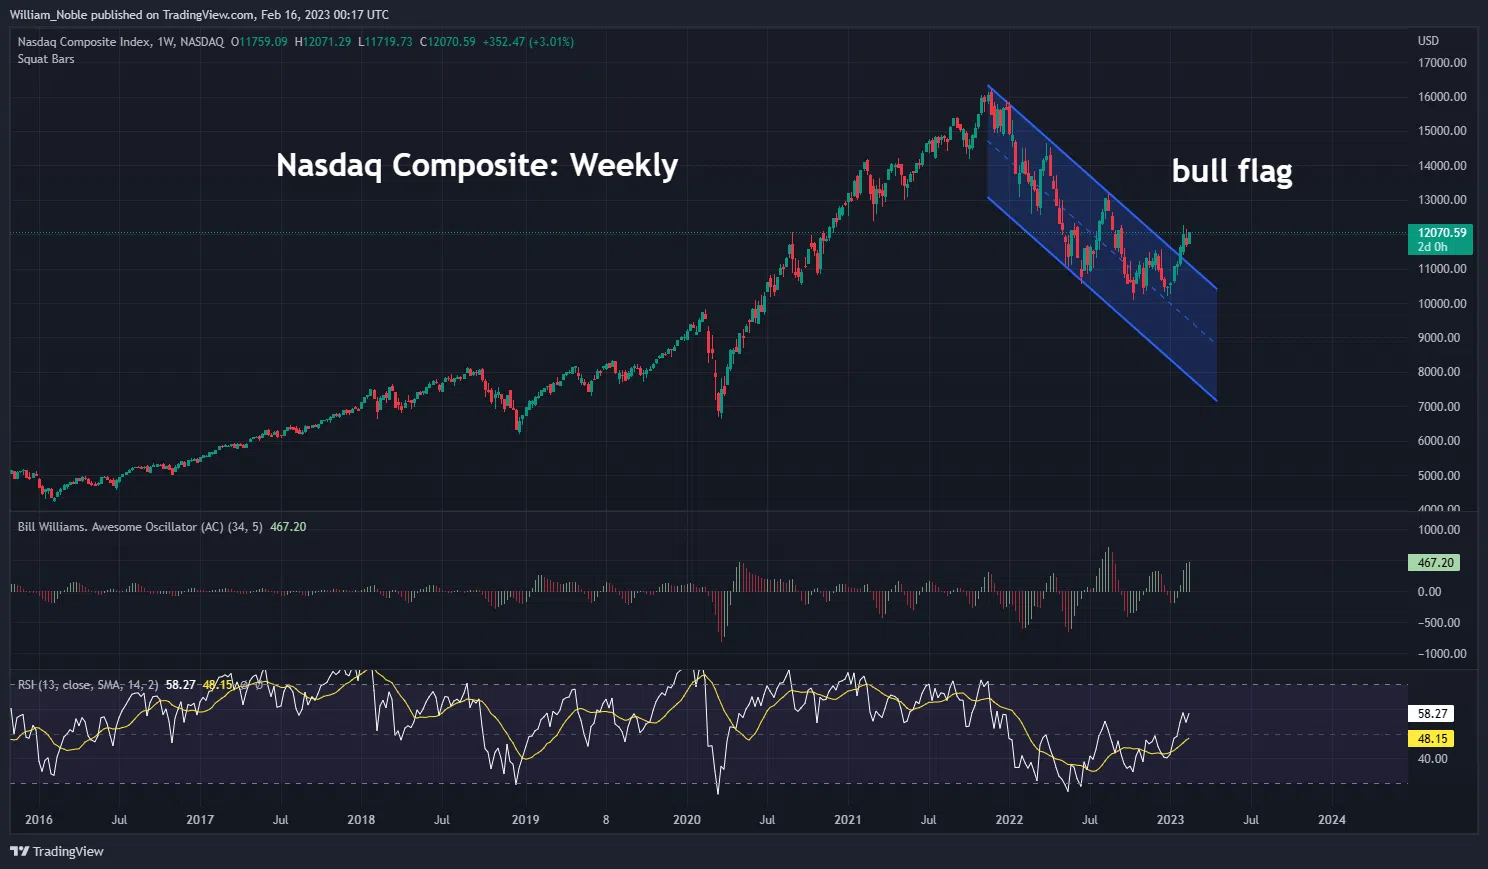 Nasdaq's breakout suggests the path of least resistance for tech stocks and crypto is on the higher side, per Noble. (William Noble/TradingView) 